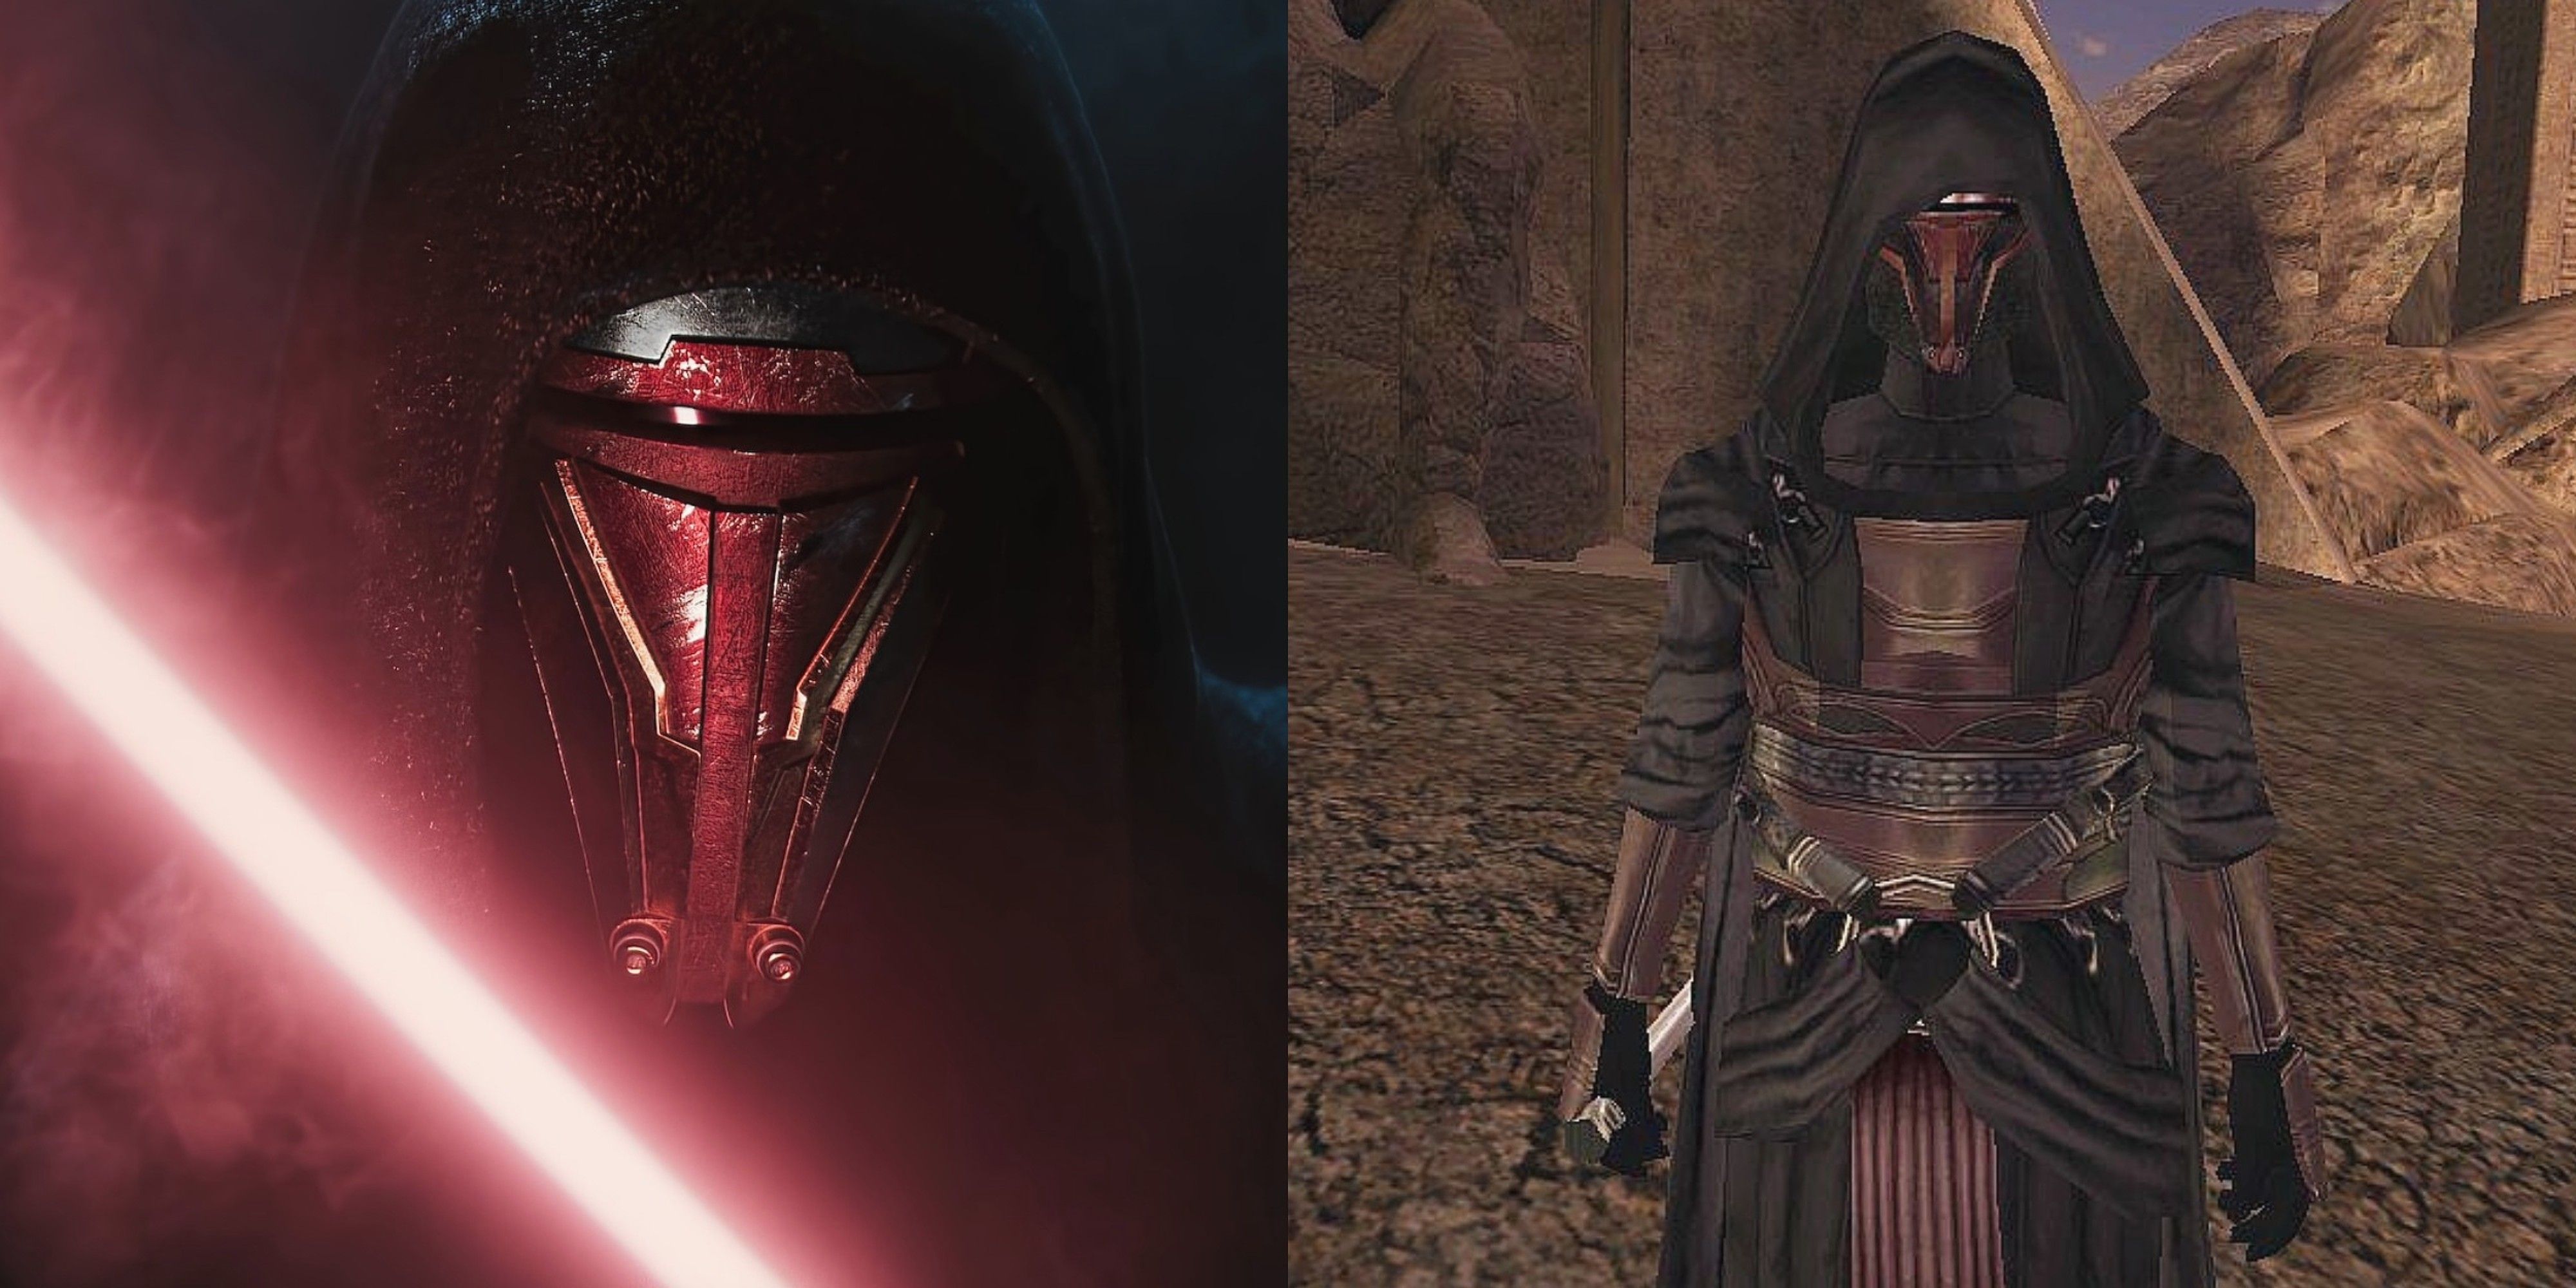 Darth Revan In Star Wars: Knights of the Old Republic Remake And The Original